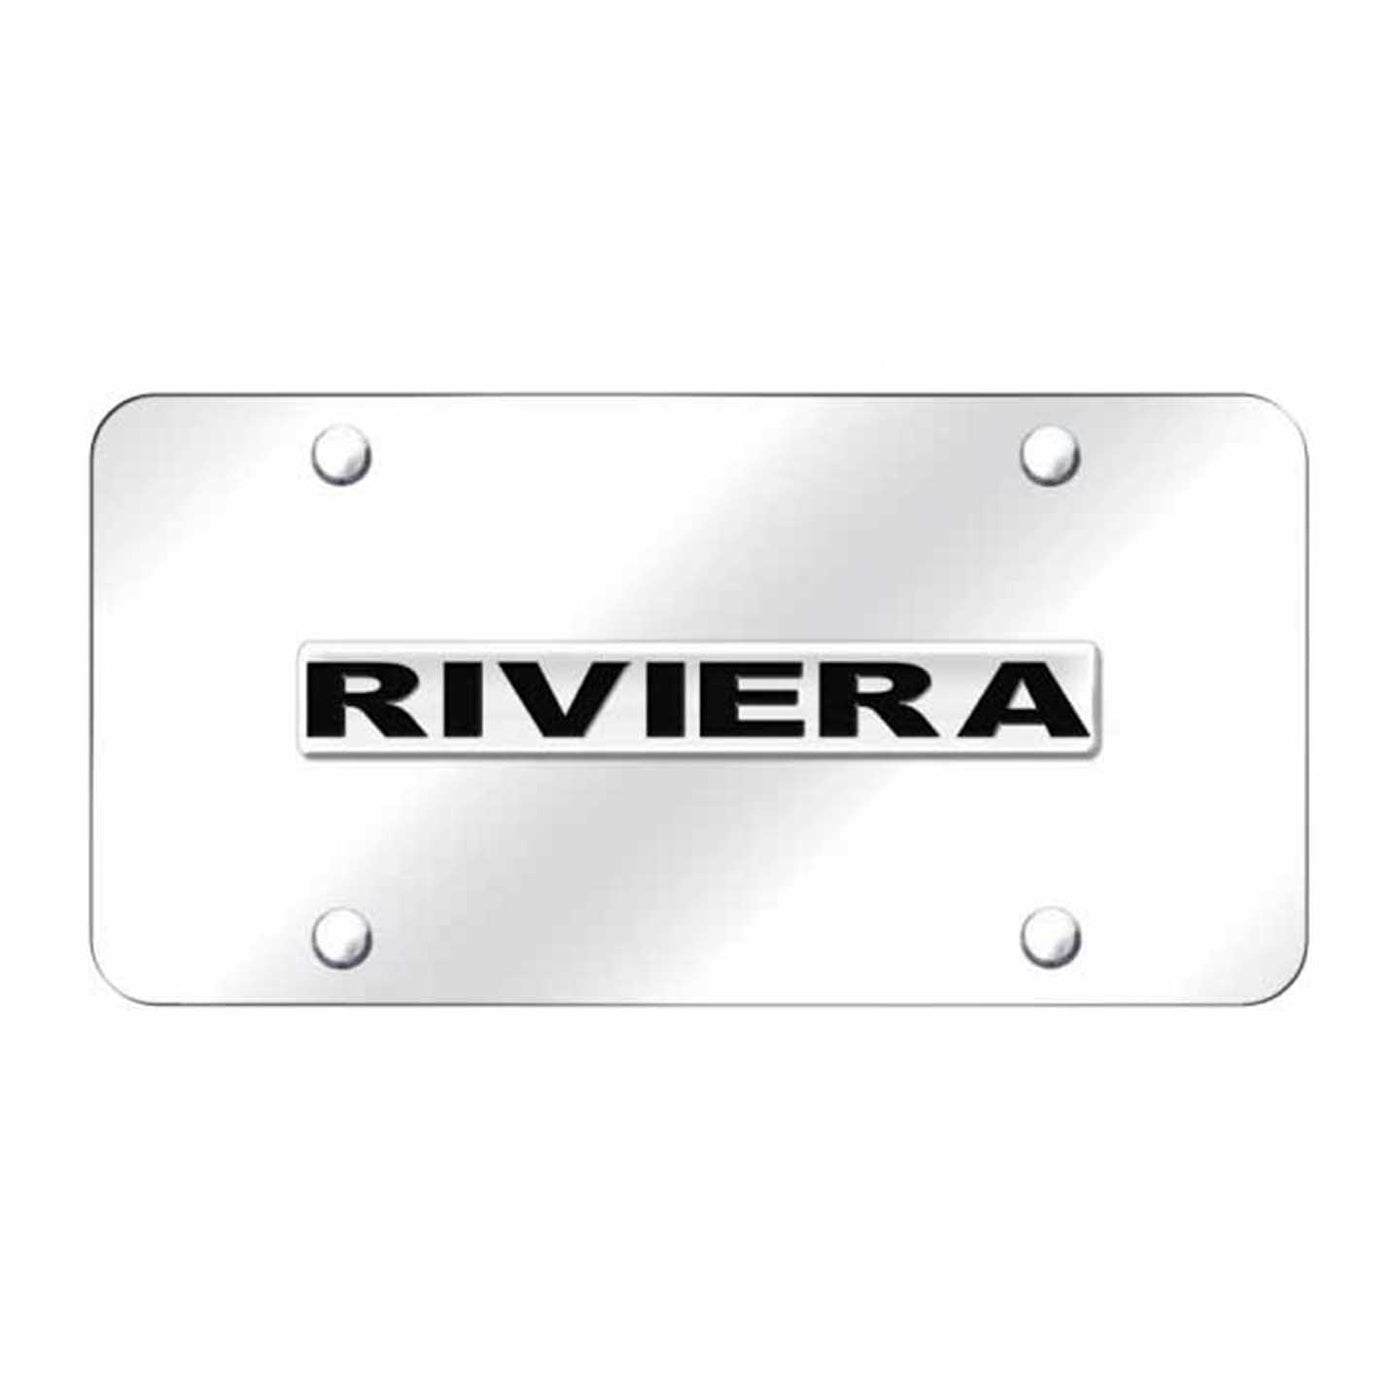 Riviera Name License Plate - Chrome on Mirrored